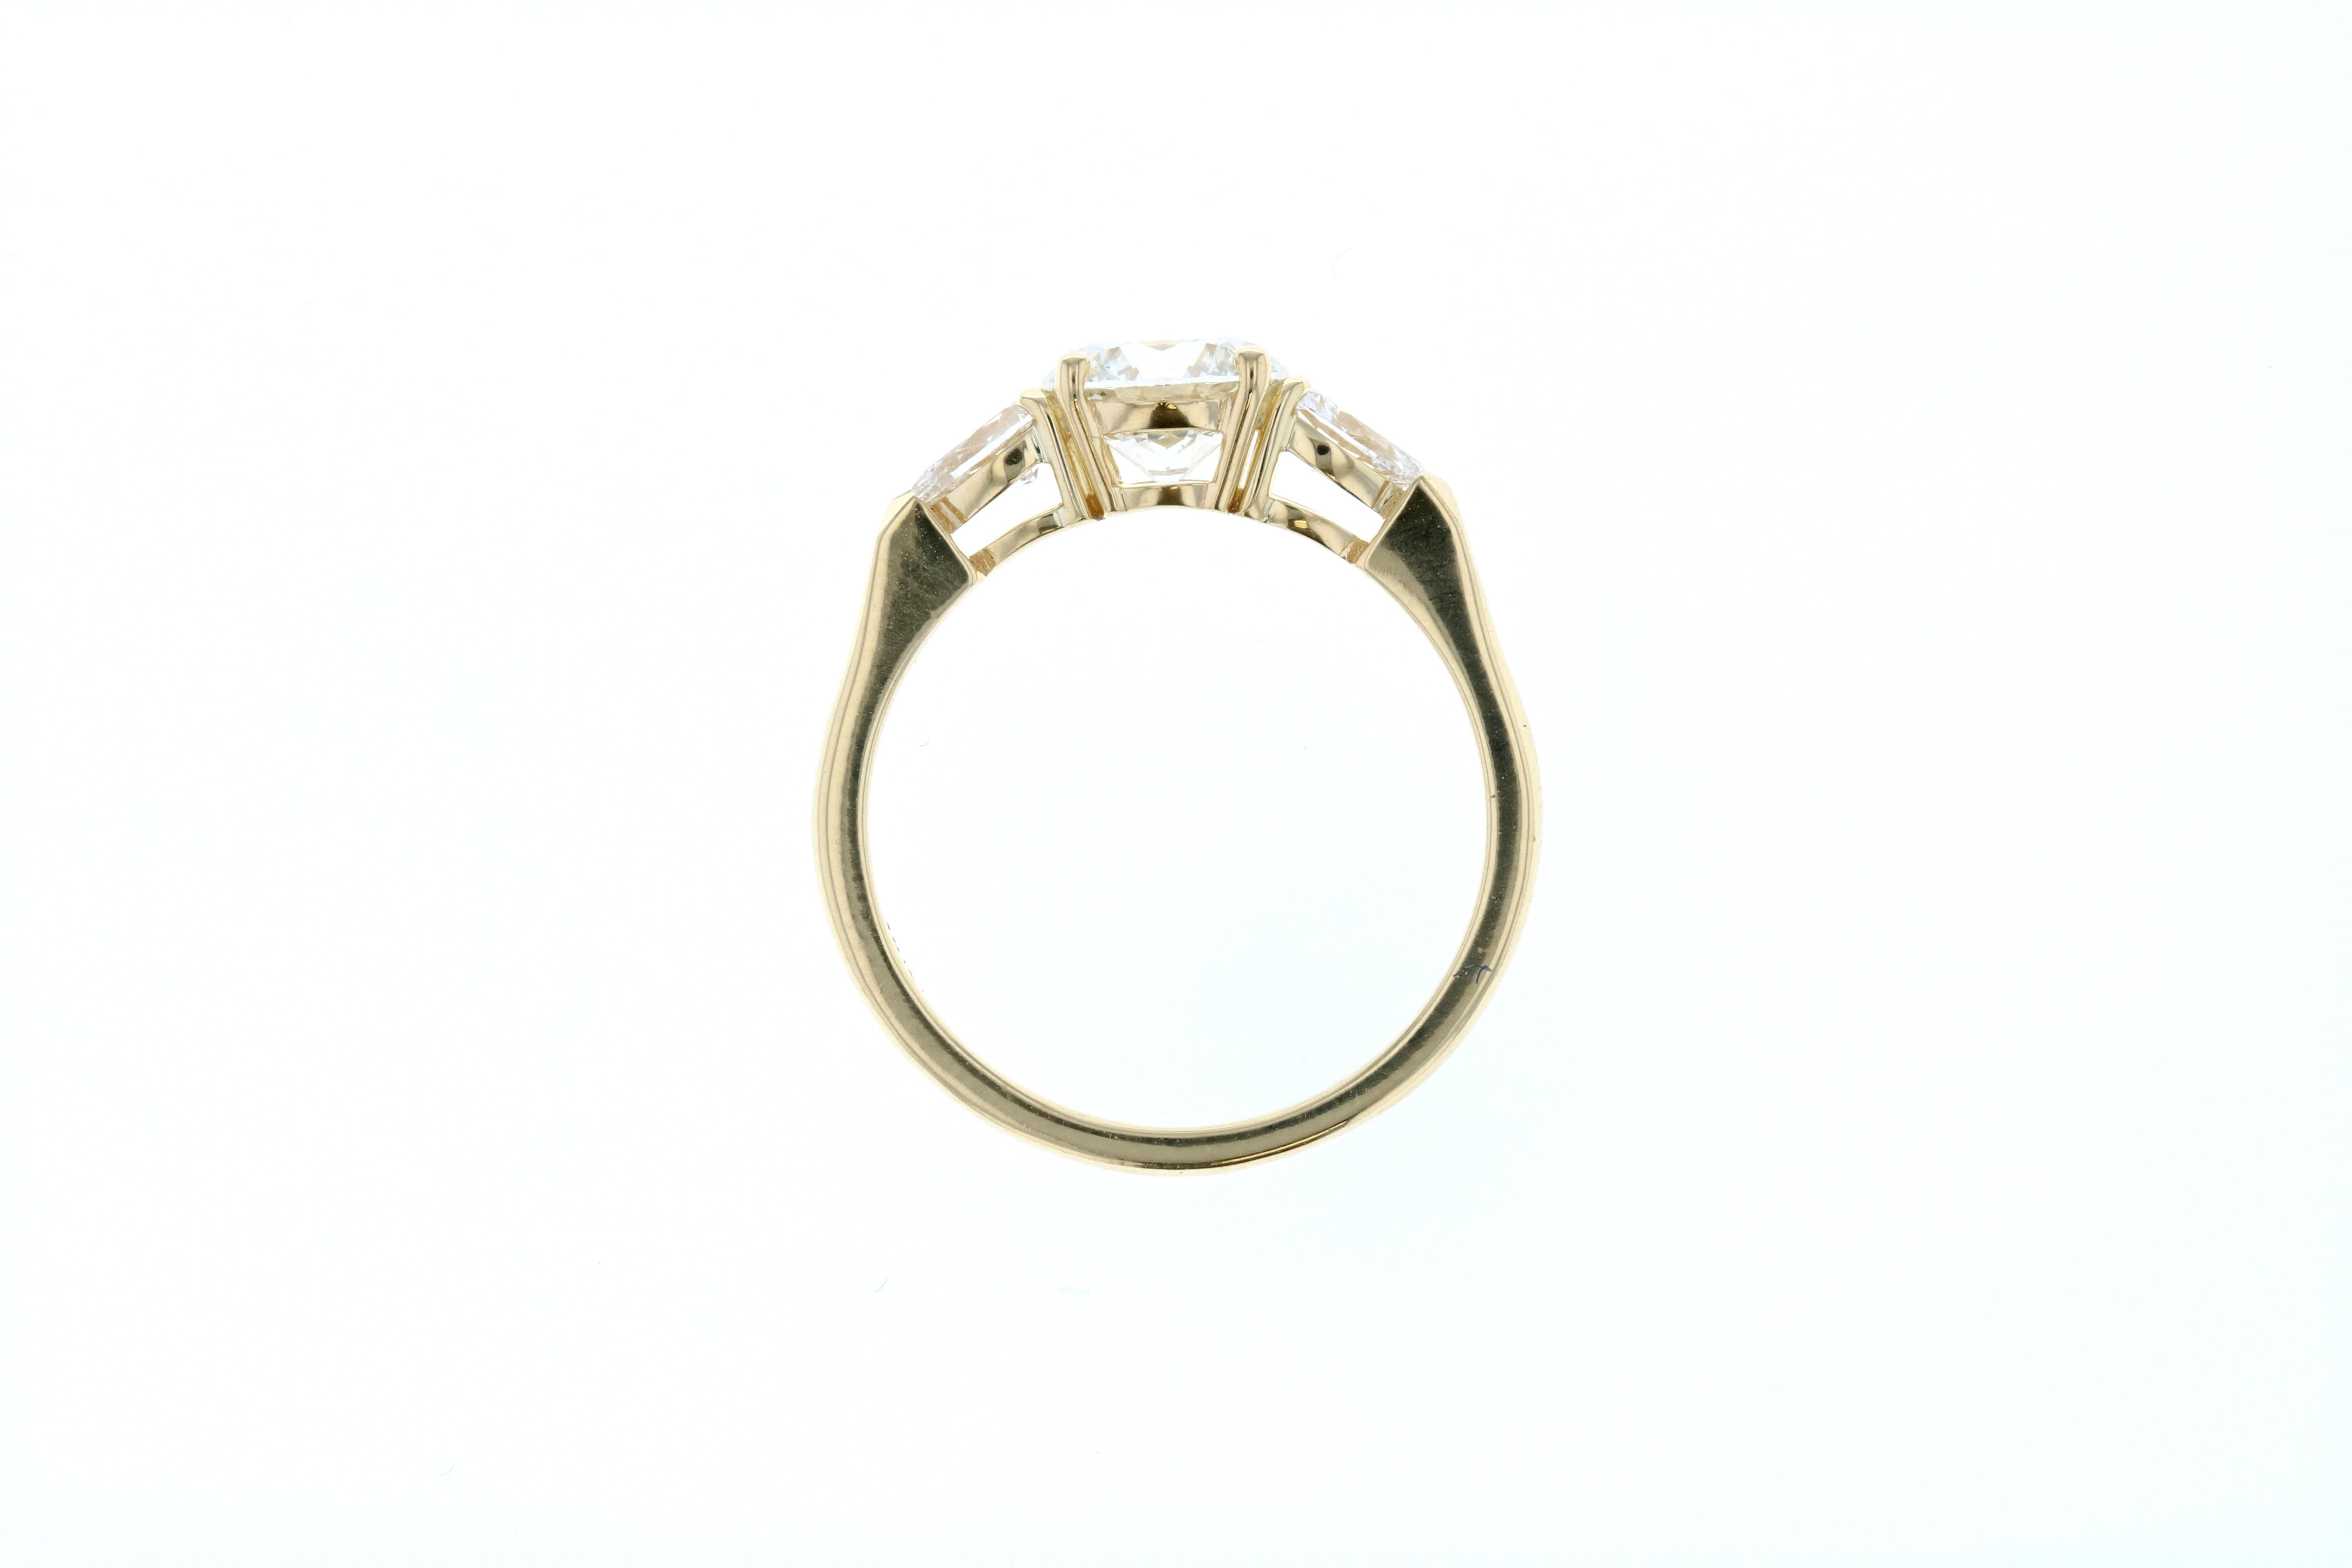 This stunning engagement ring is crafted in 18KT yellow gold, and contains a Round Diamond (1.13 total carat weight, H color, SI1 clarity) surrounded by 2 pear shape diamonds (0.39 total carat weight, H color, SI clarity). A perfect way to